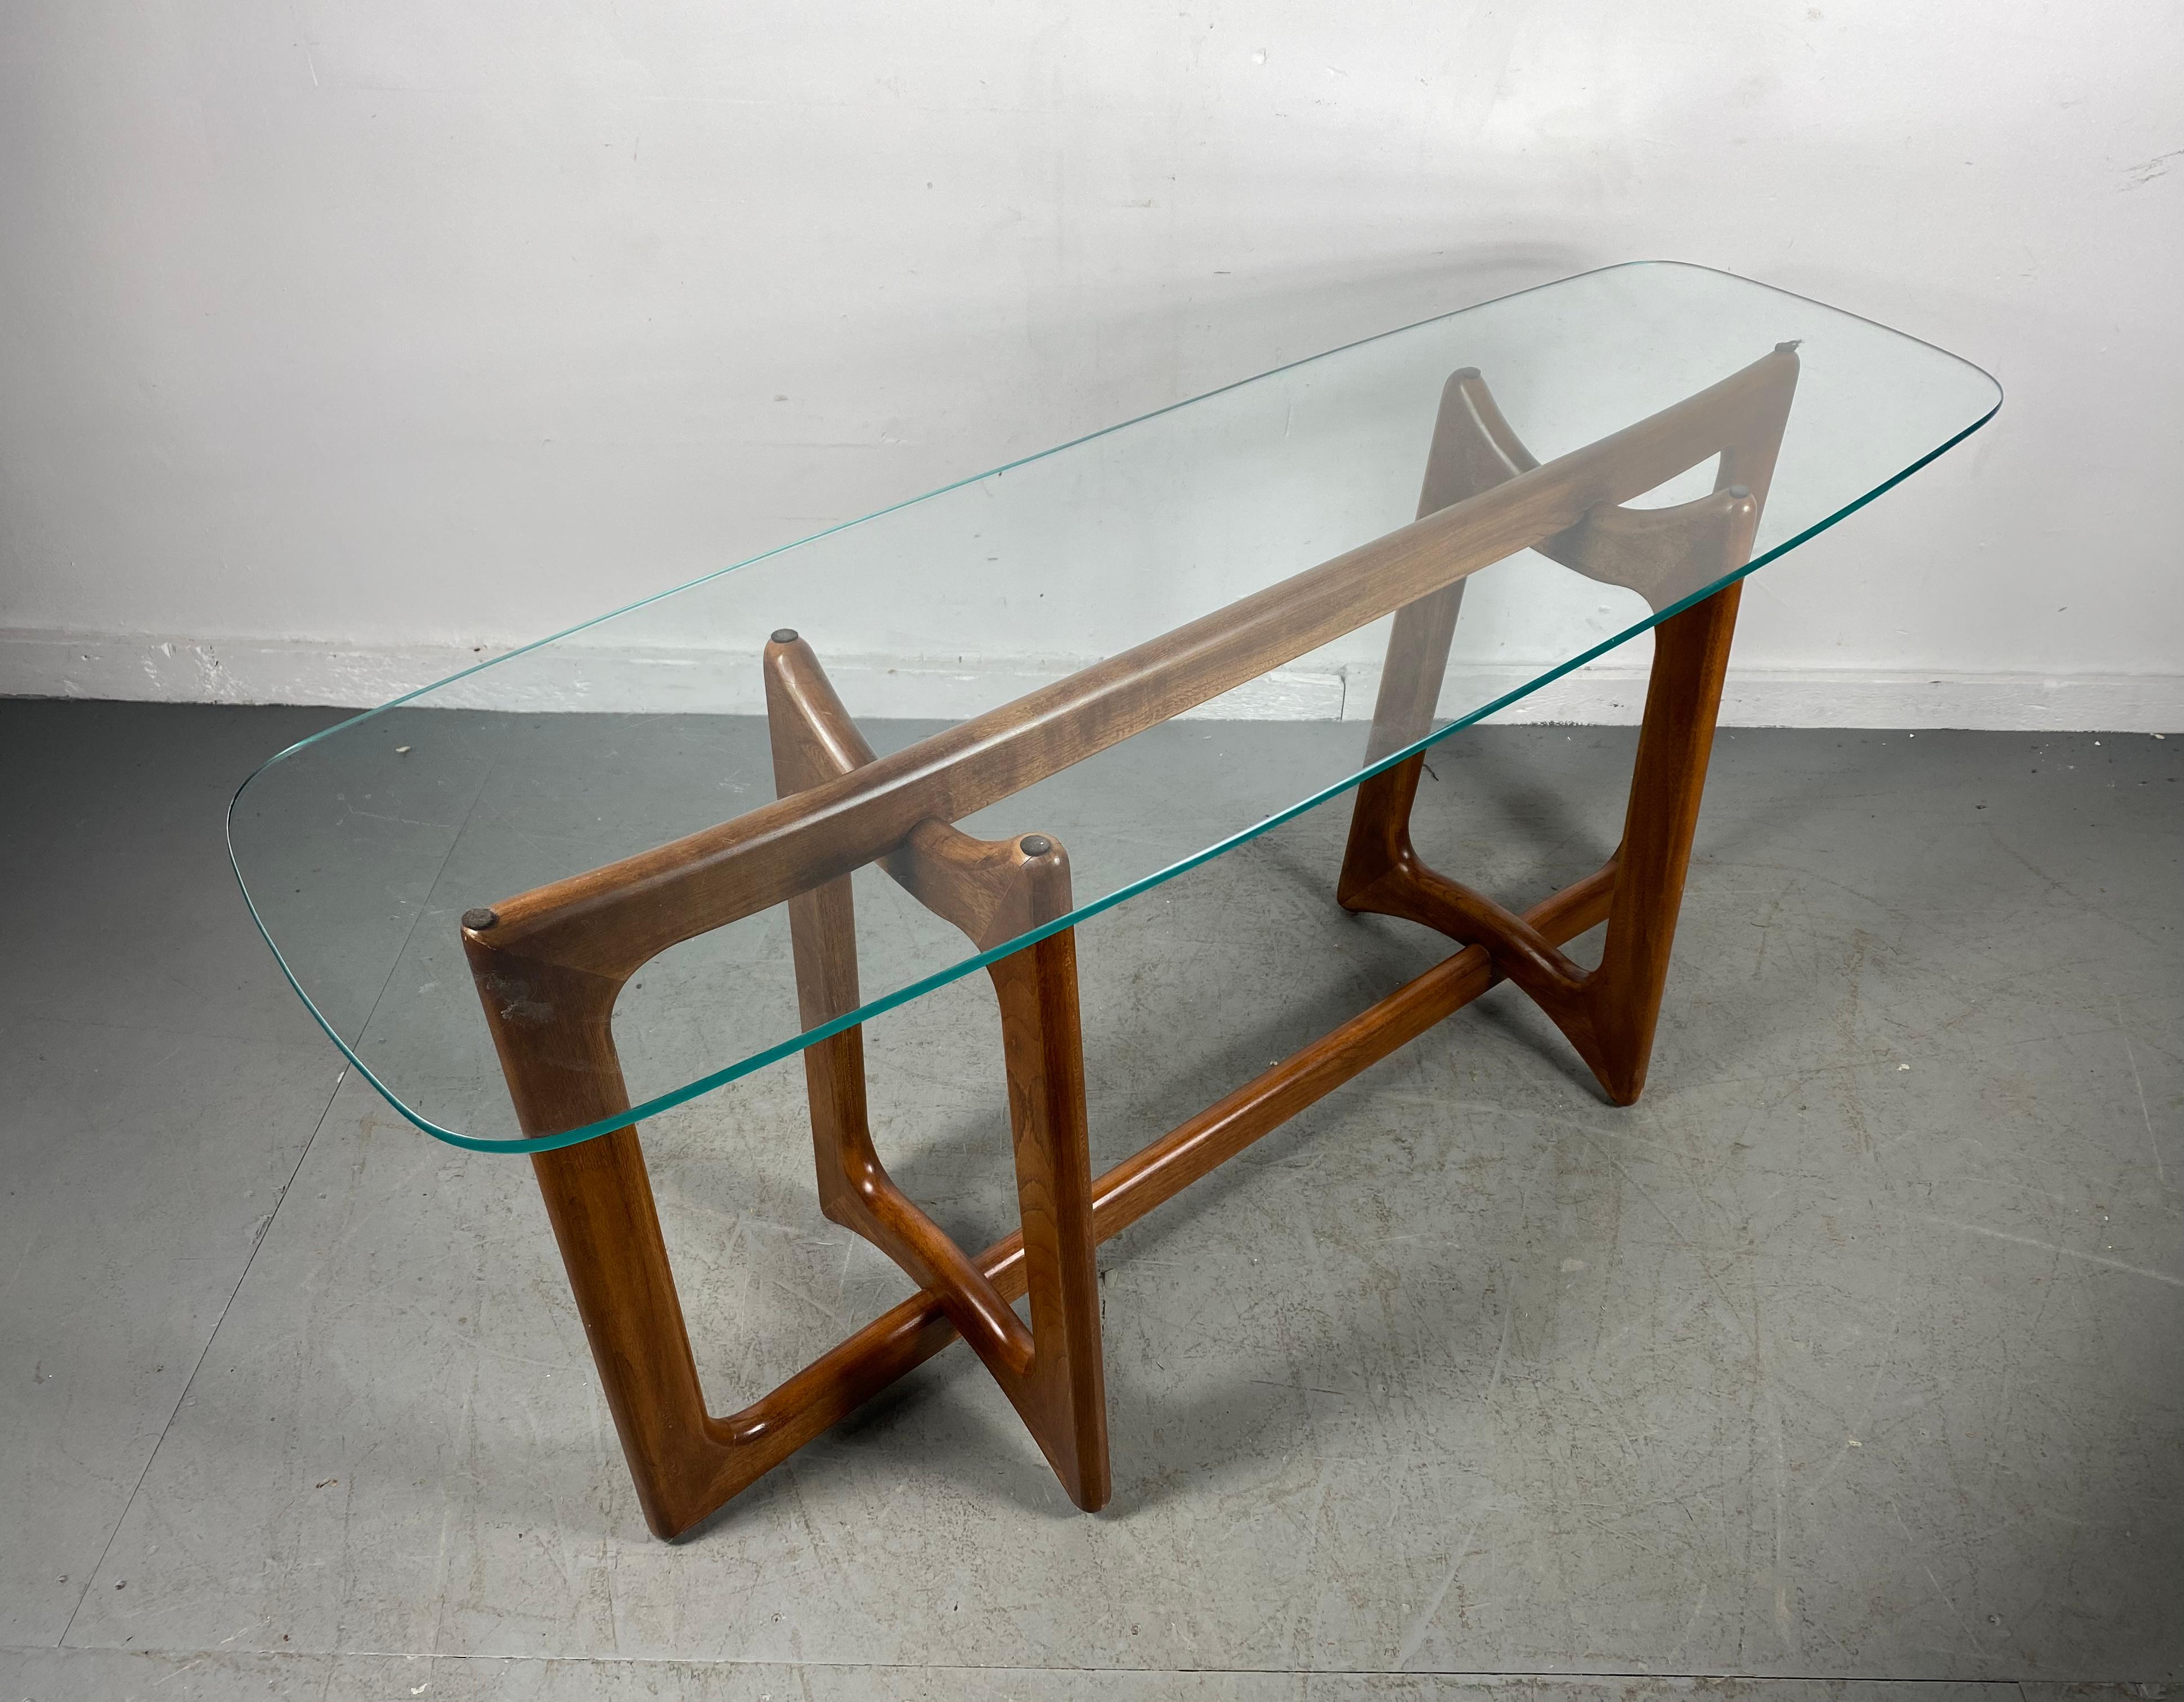 Glass Adrian Pearsall Bowtie Console Table / Sculptural Walnut, Mid-Century Modern